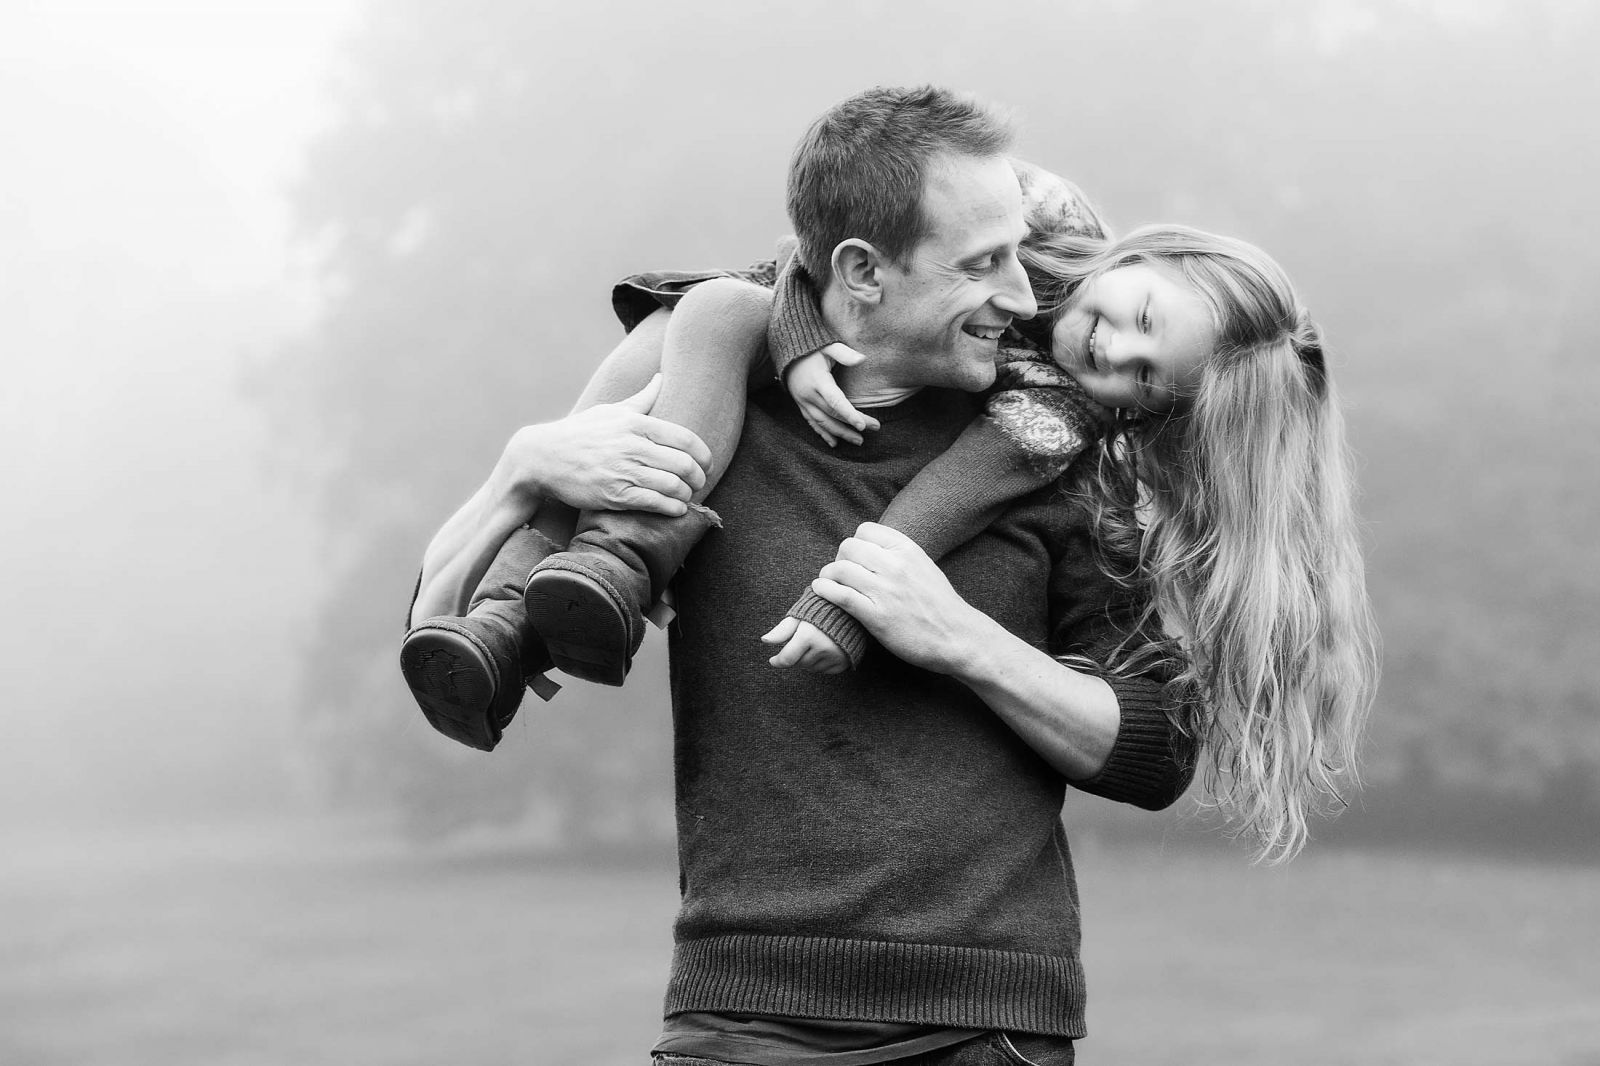 photographer in derby offering child and family portraits; like this shot of a father and daughter having fun together.